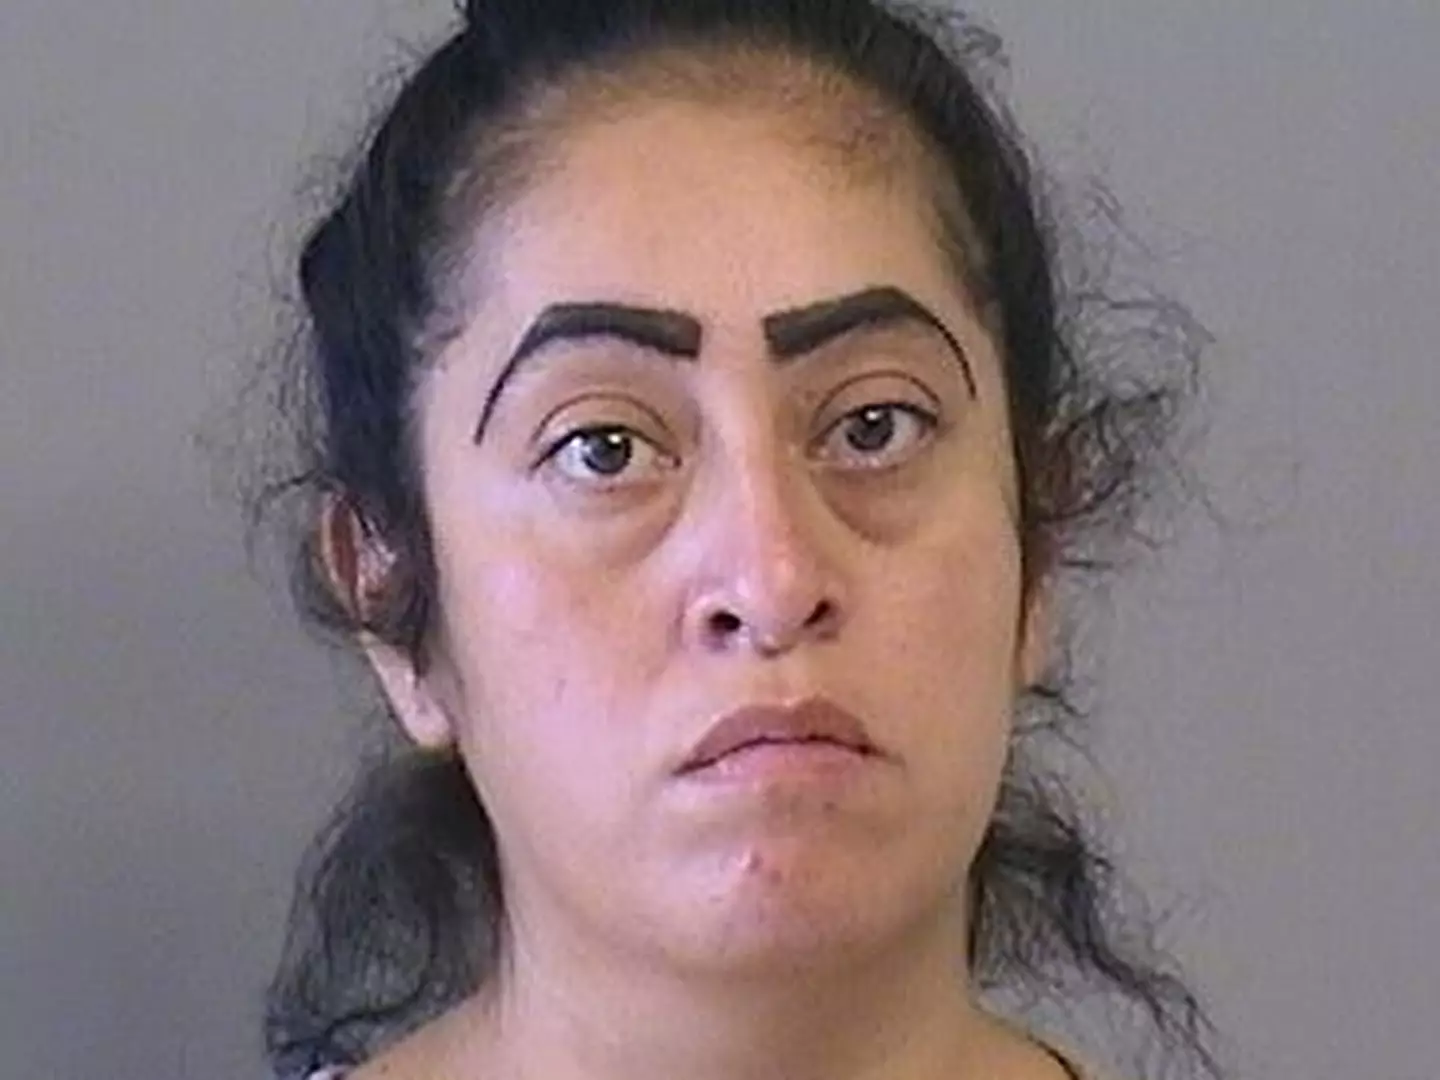 Desiree Castaneda will serve two 15 year sentences, set to run concurrently.